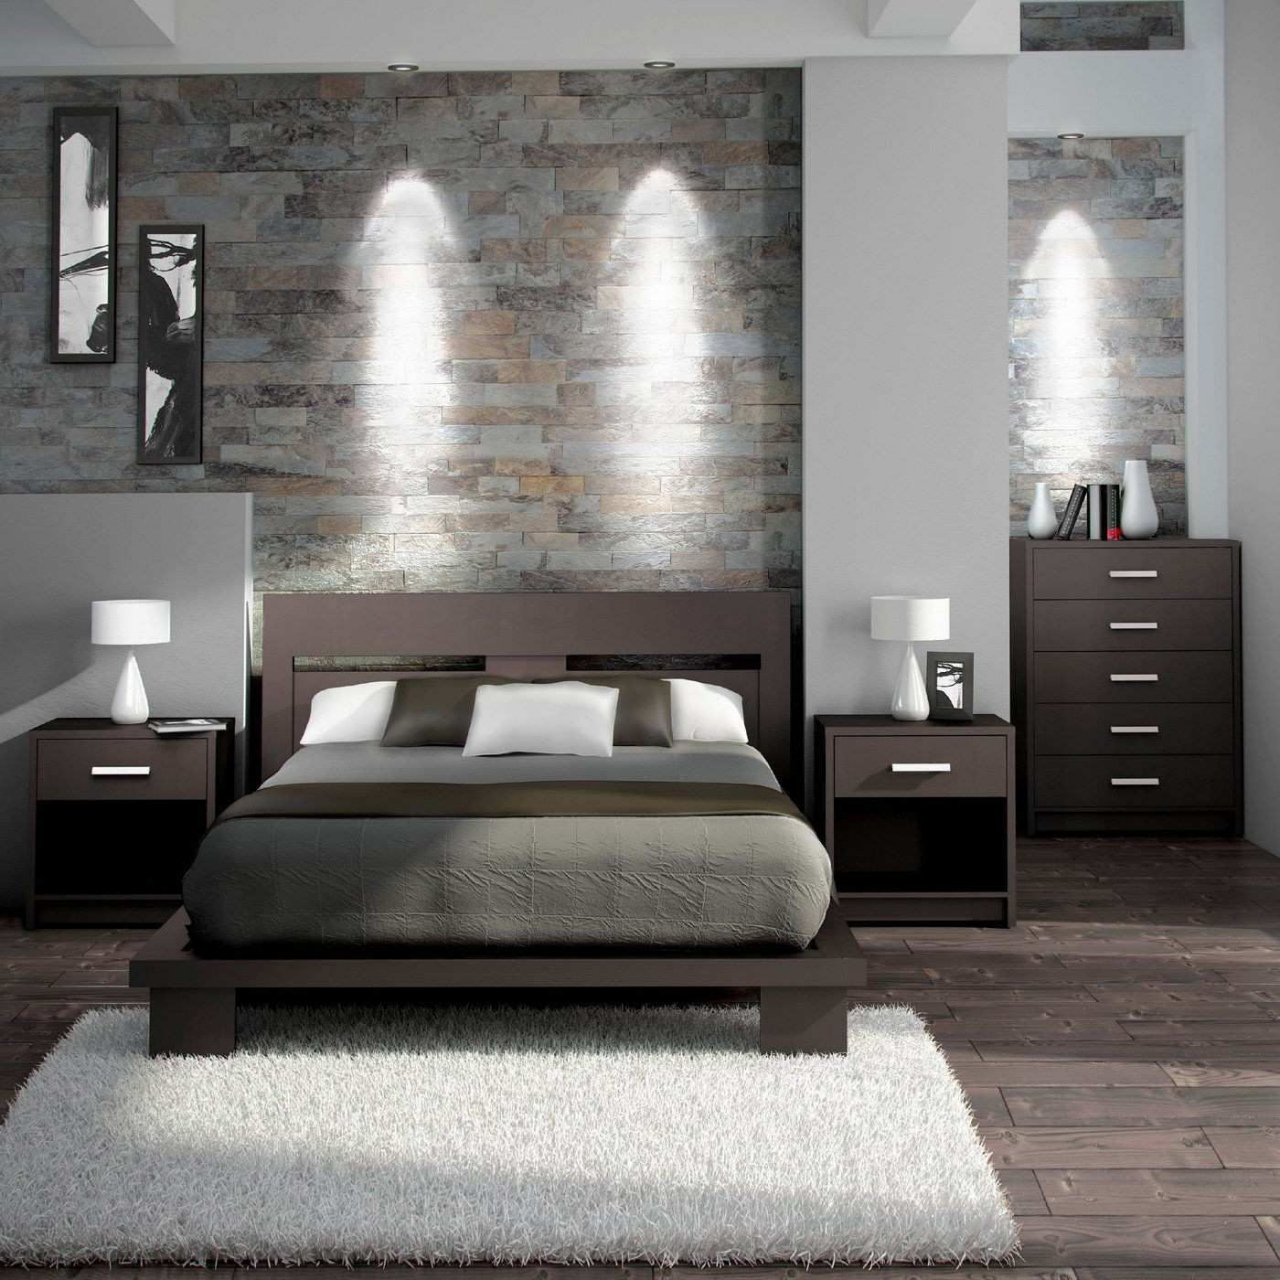 Mens Queen Bedroom Sets 30 Awesome Image Of Mens Bedroom Furniture inside dimensions 1280 X 1280